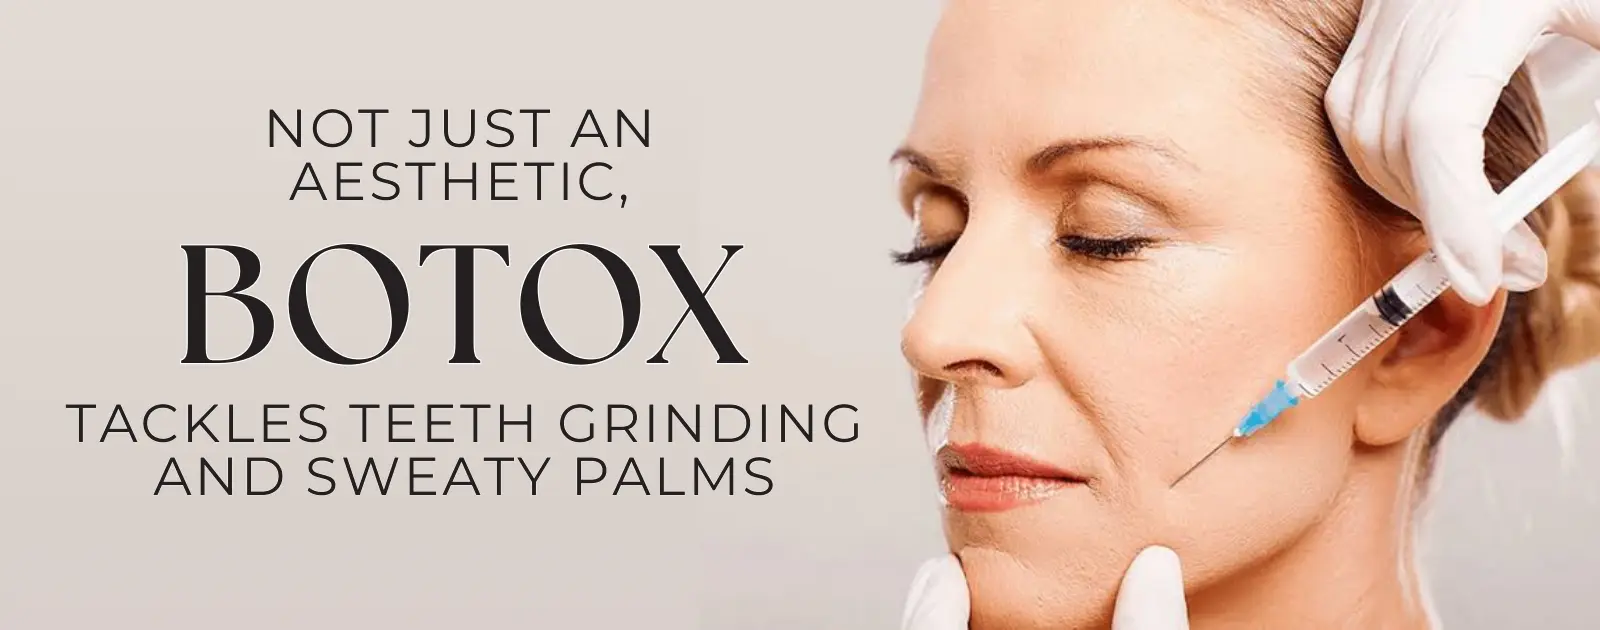 Botox for theeth grinding